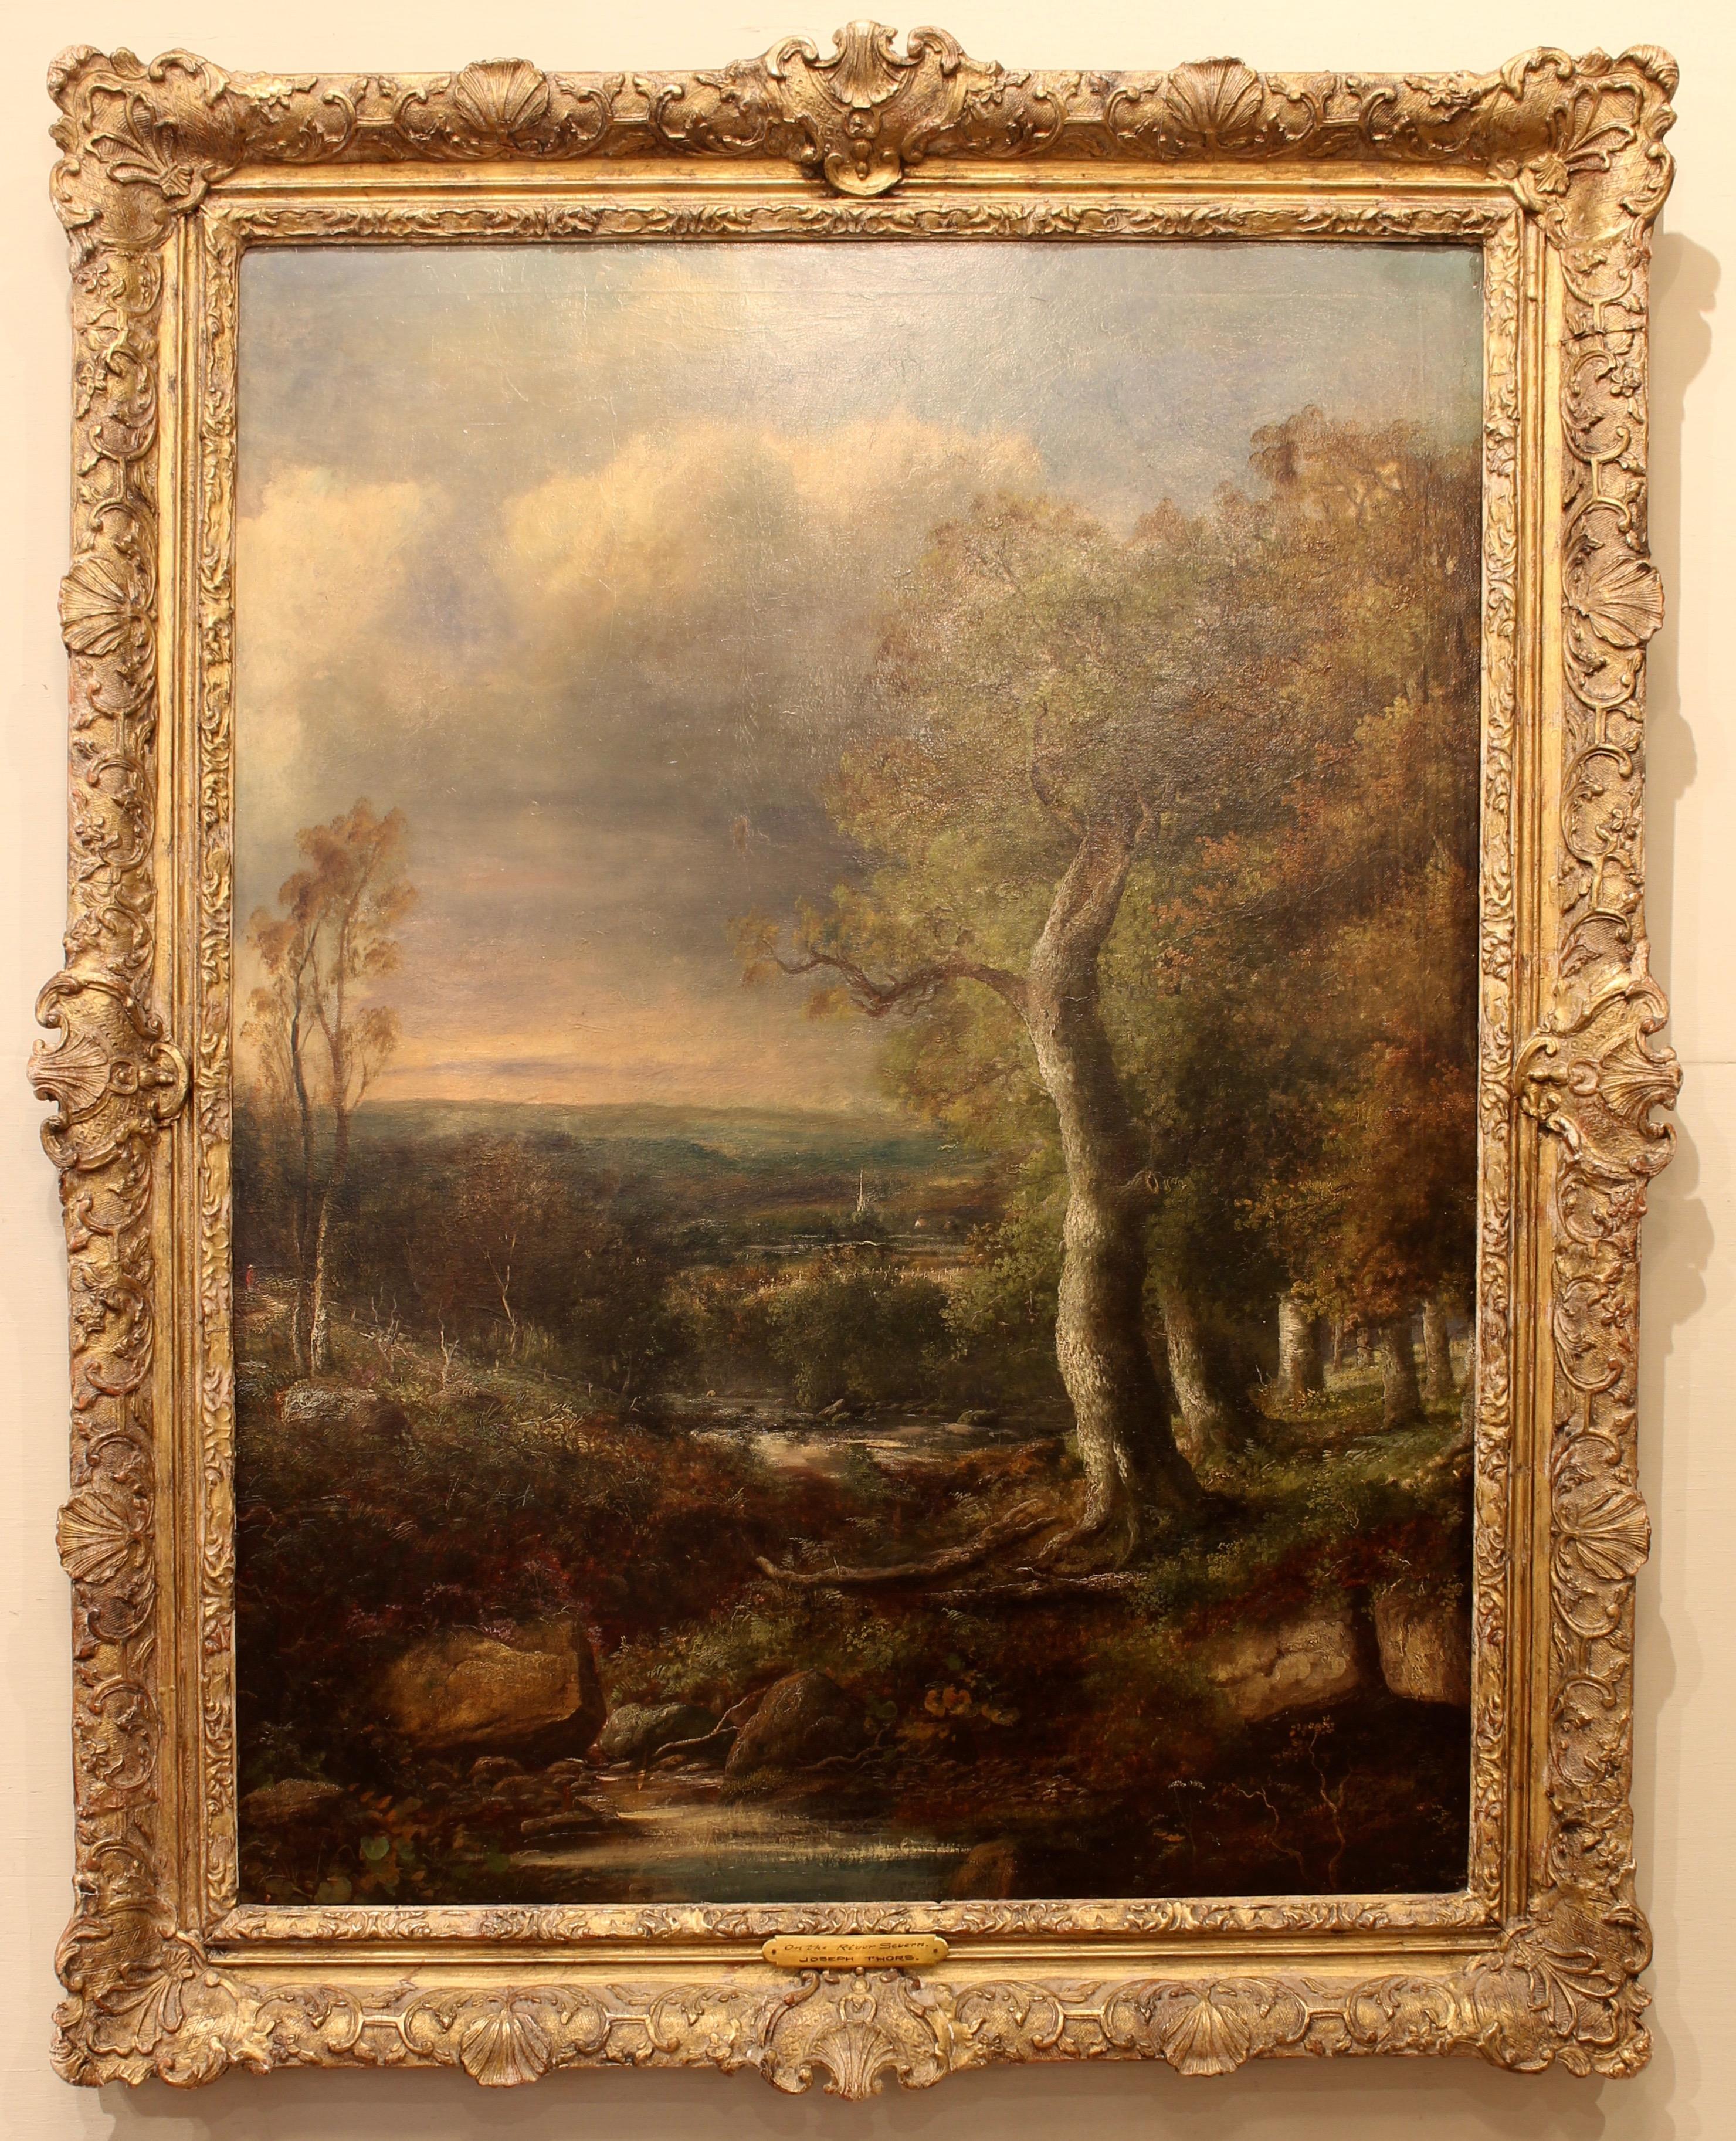 A large mid-19th century English oil on canvas landscape painting by Joseph Thors (1835-1920) a Dutch born English landscape painter known for his pastoral paintings of the English countryside. The painting appears to be in its original giltwood